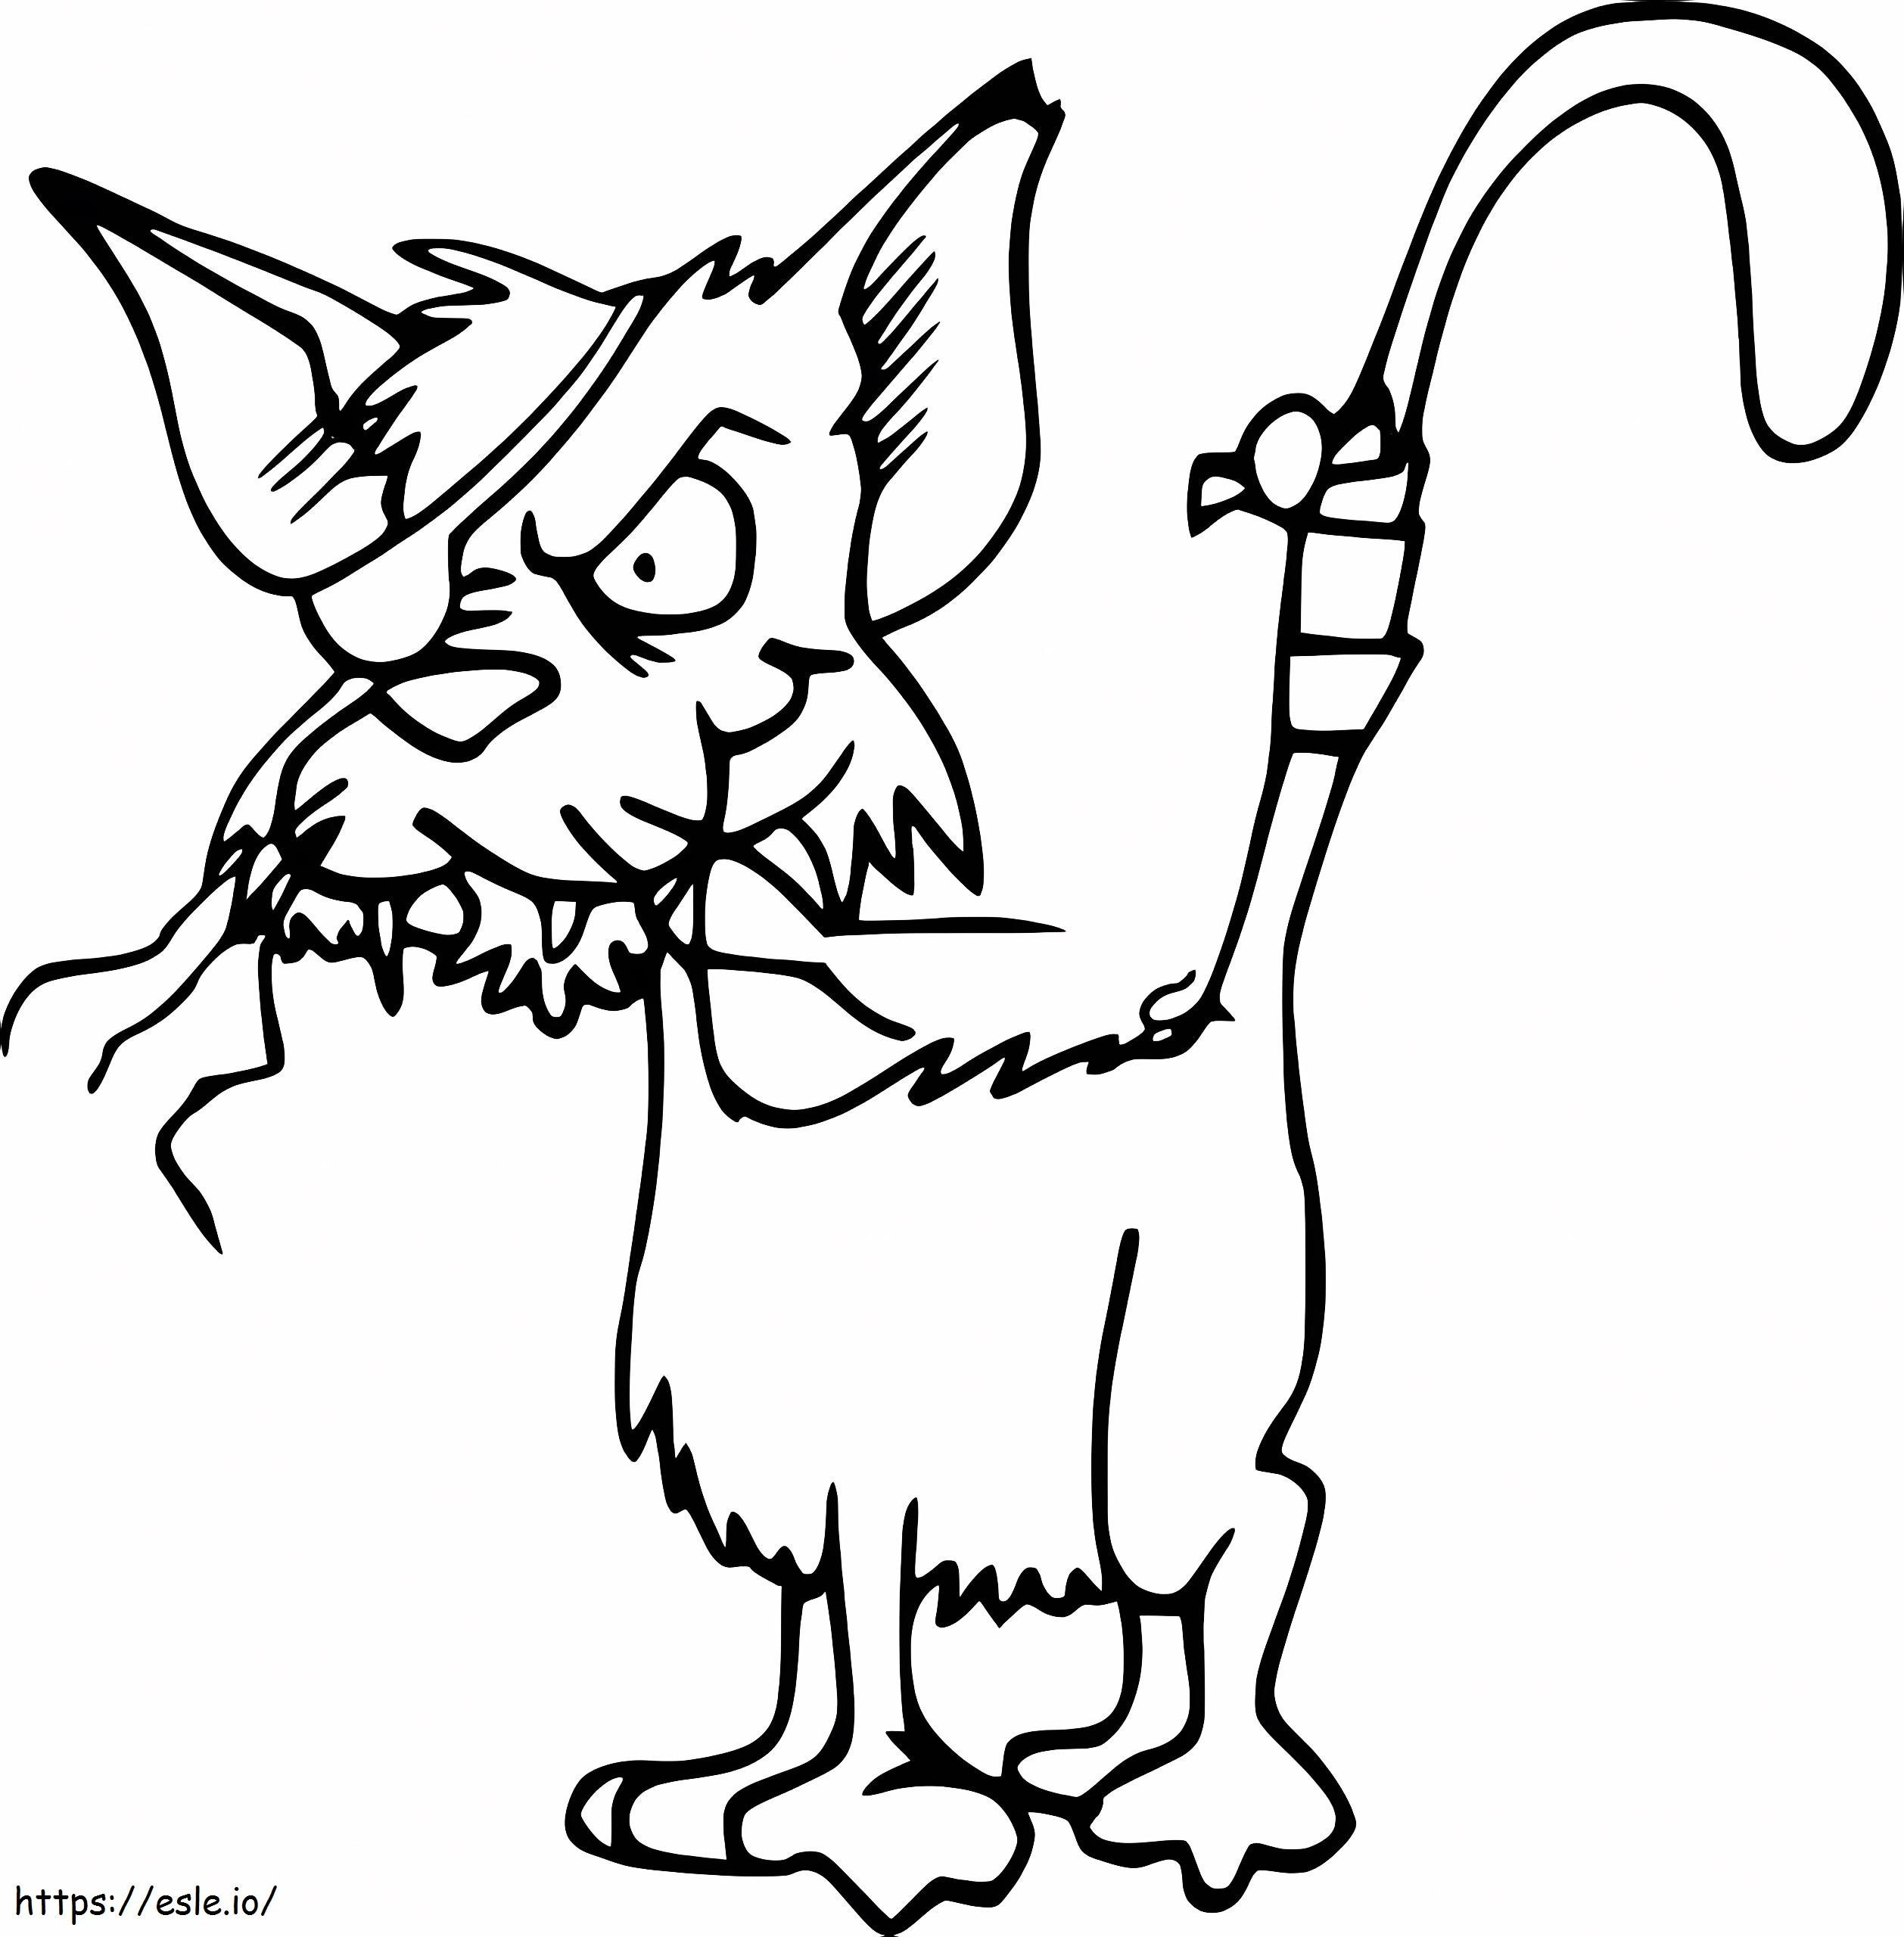 Bad Cat coloring page